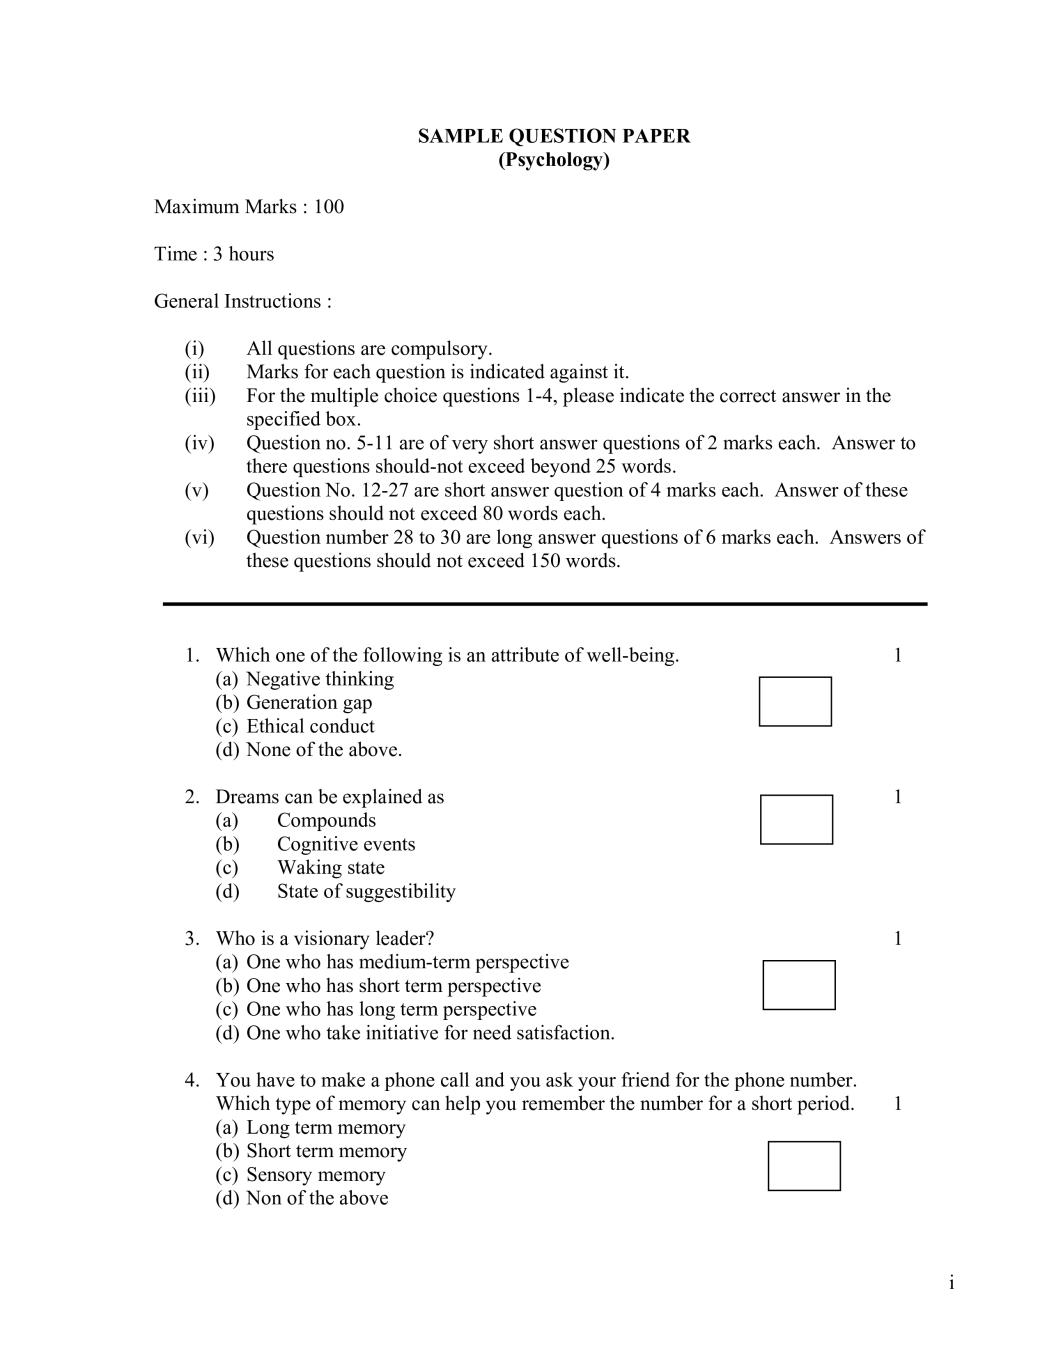 NIOS Class 10 Sample Paper 2020 - Psychology - Page 1